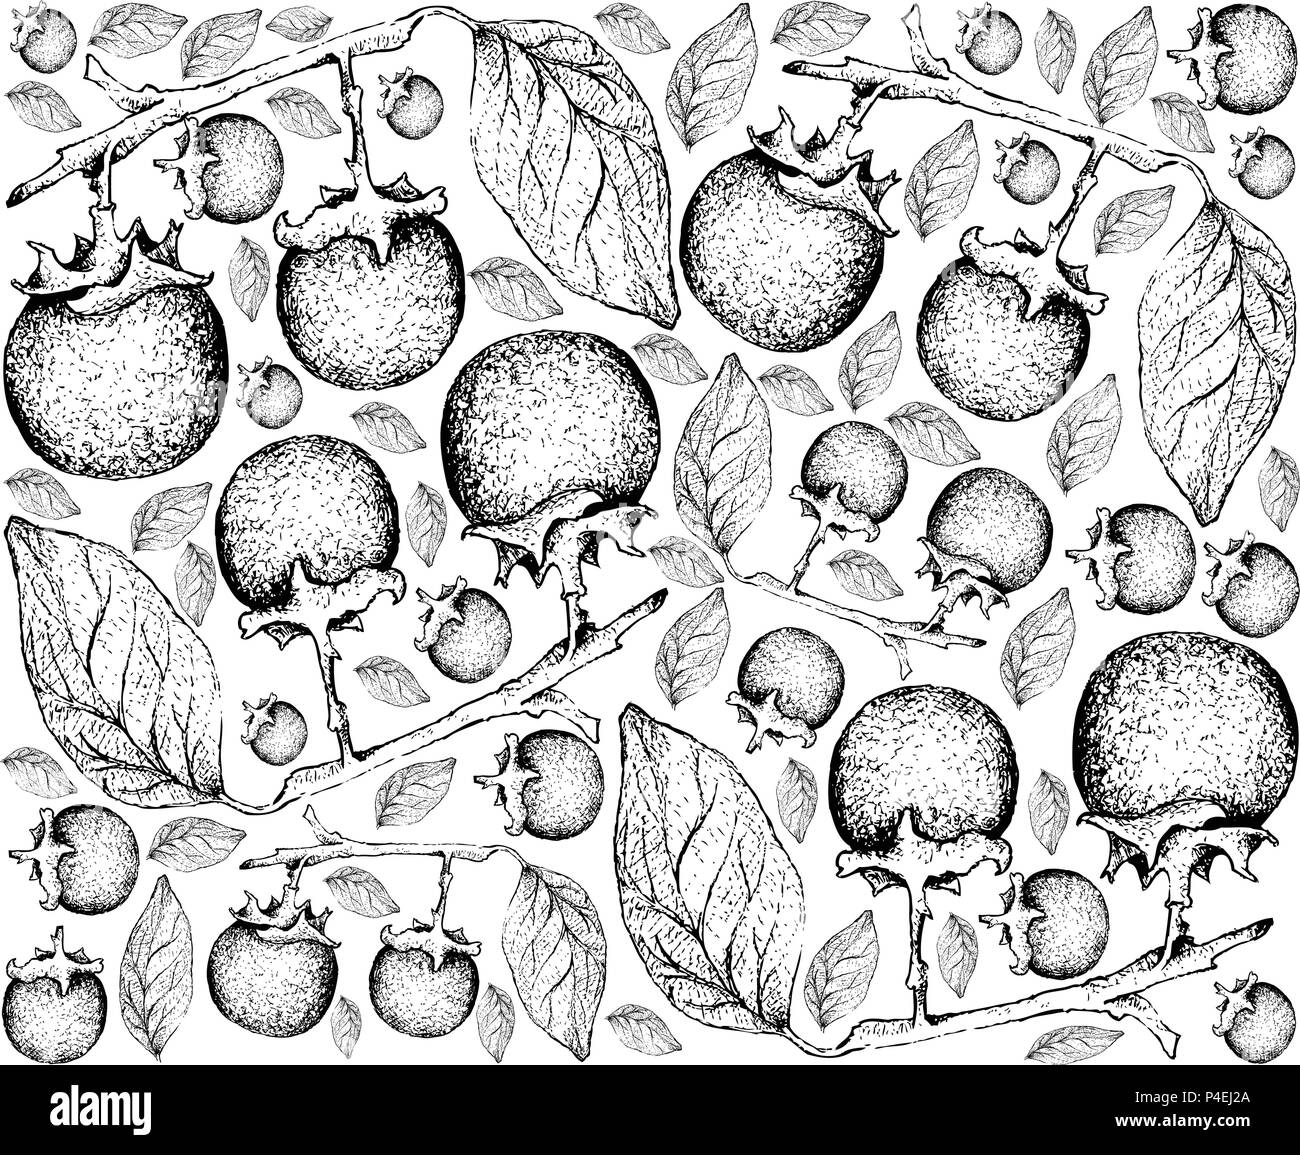 Tropical Fruit, Illustration Wallpaper of Hand Drawn Sketch of Ripe and Sweet Ebony or Diospyros Rhodocalyx Fruits Isolated on White Background. Stock Vector